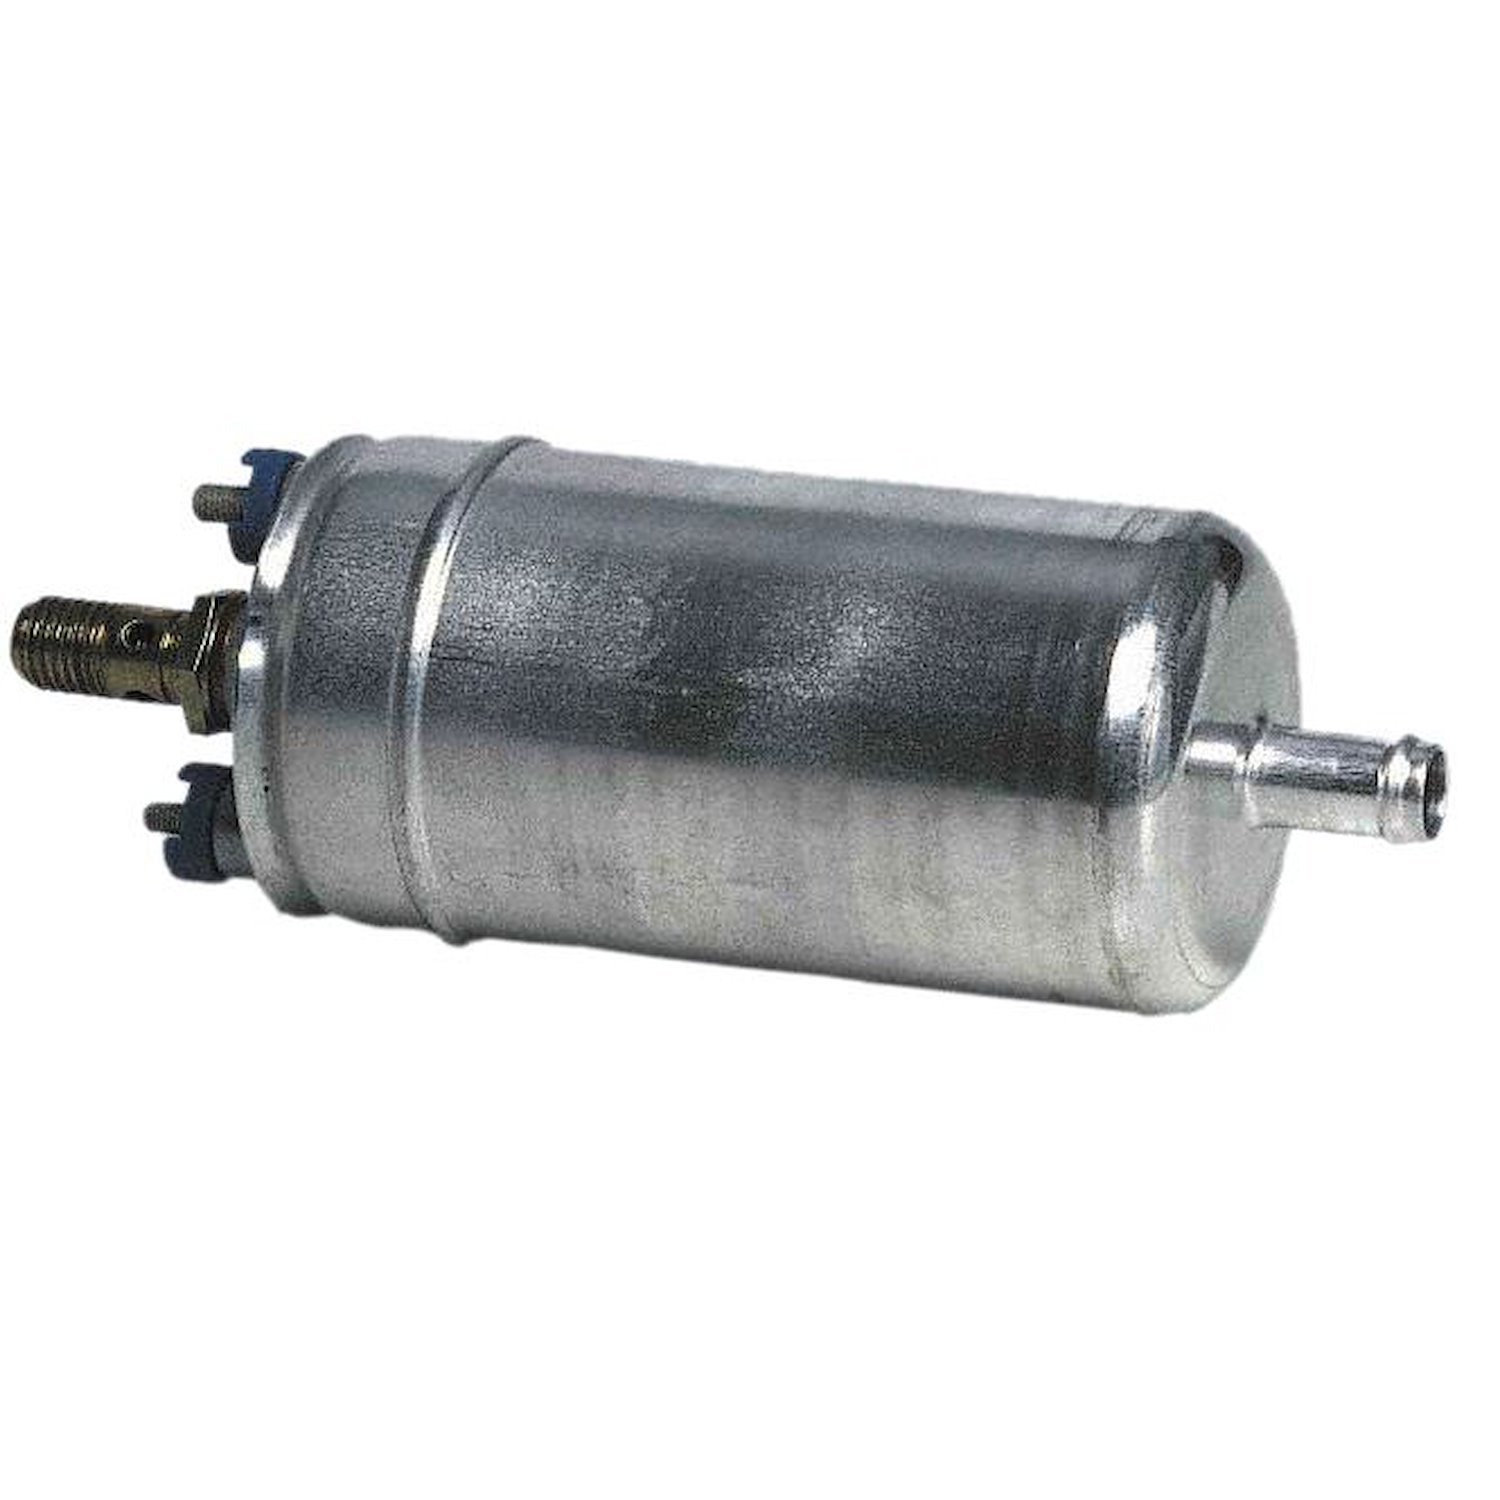 Replacement In-Line Electric Fuel Pump for 1988-1993 Chevy/GMC